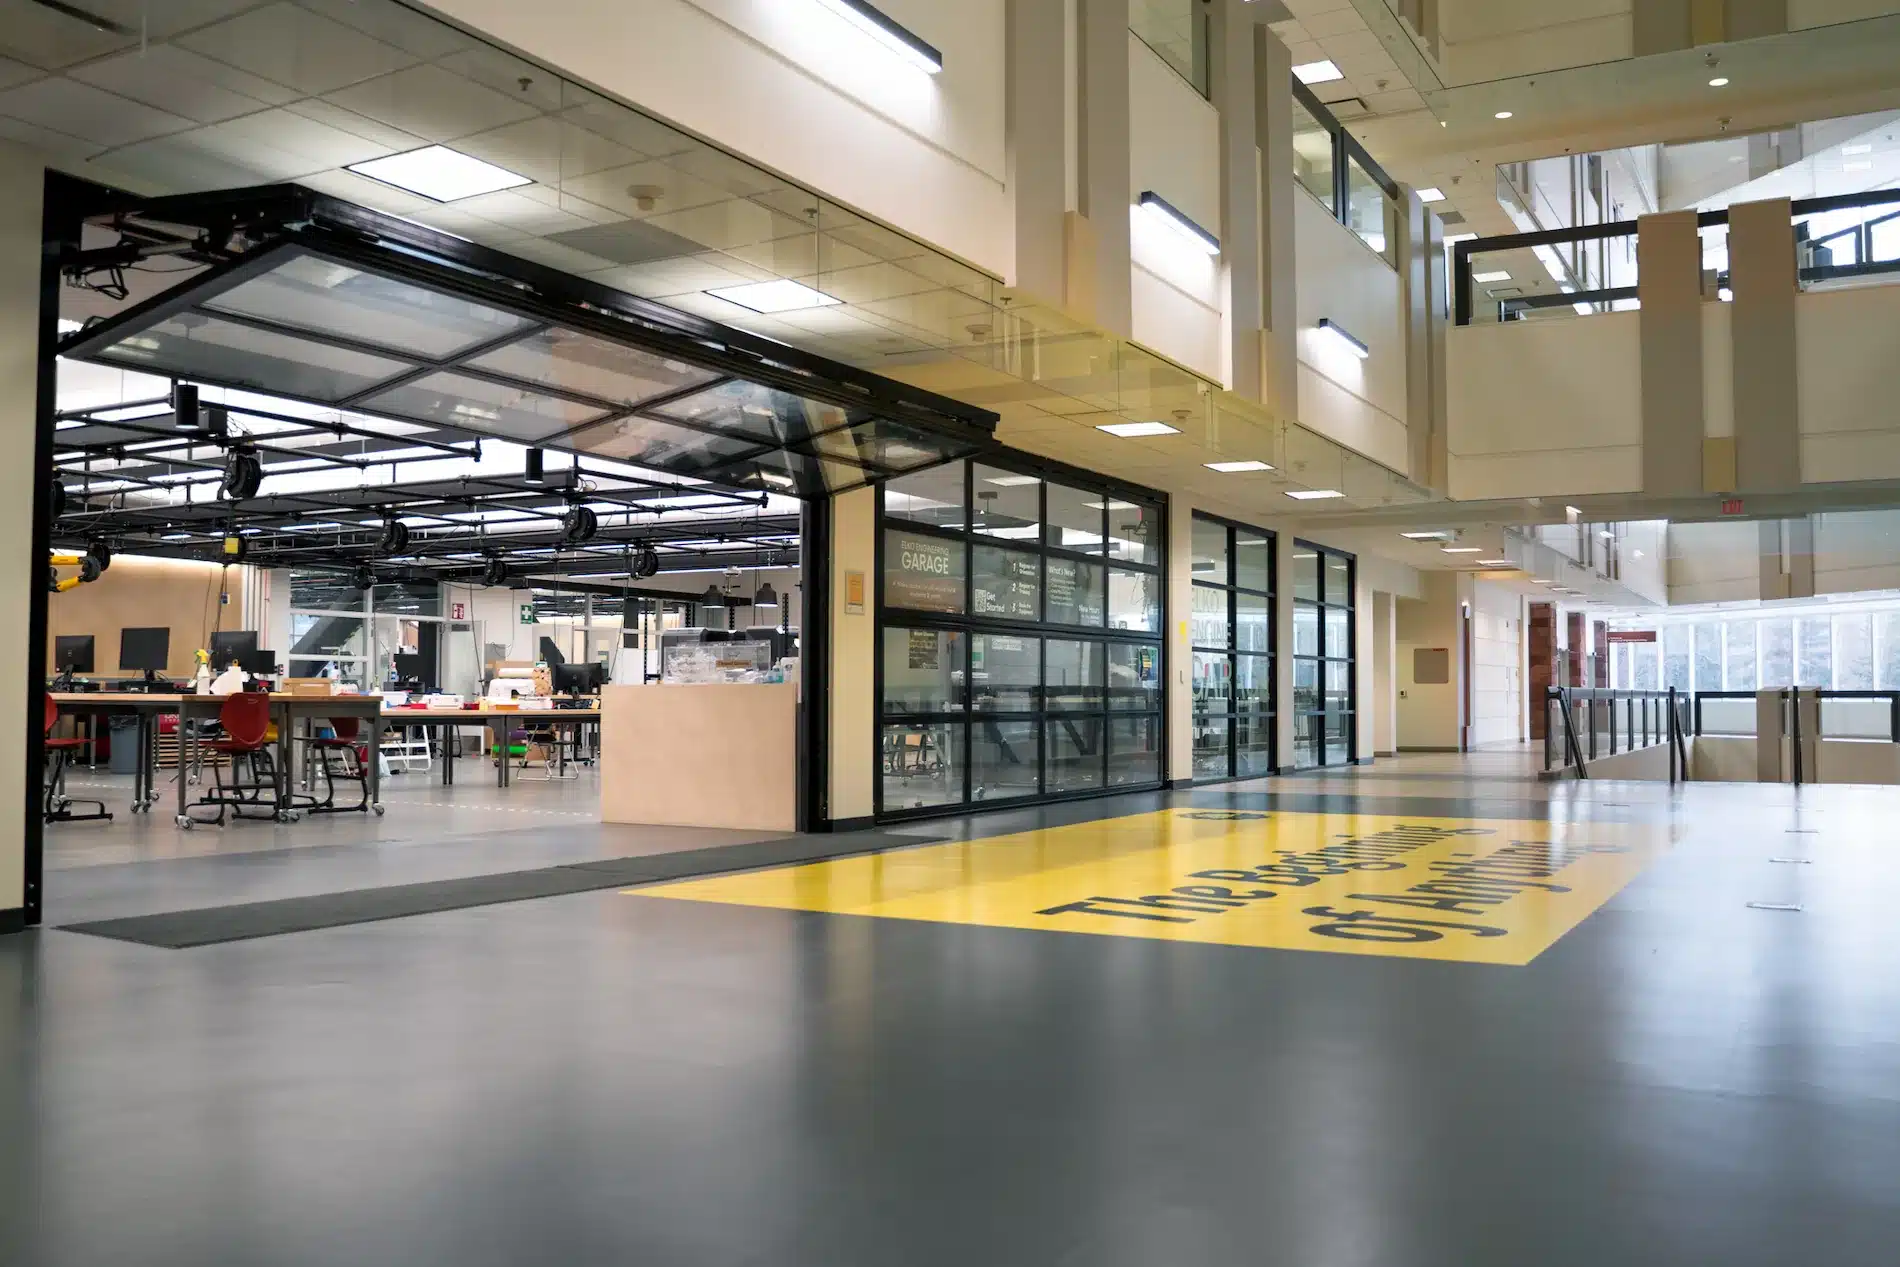 A hallway equipped with advanced nanofabrication technology and AI that features a vibrant yellow sign and floor.